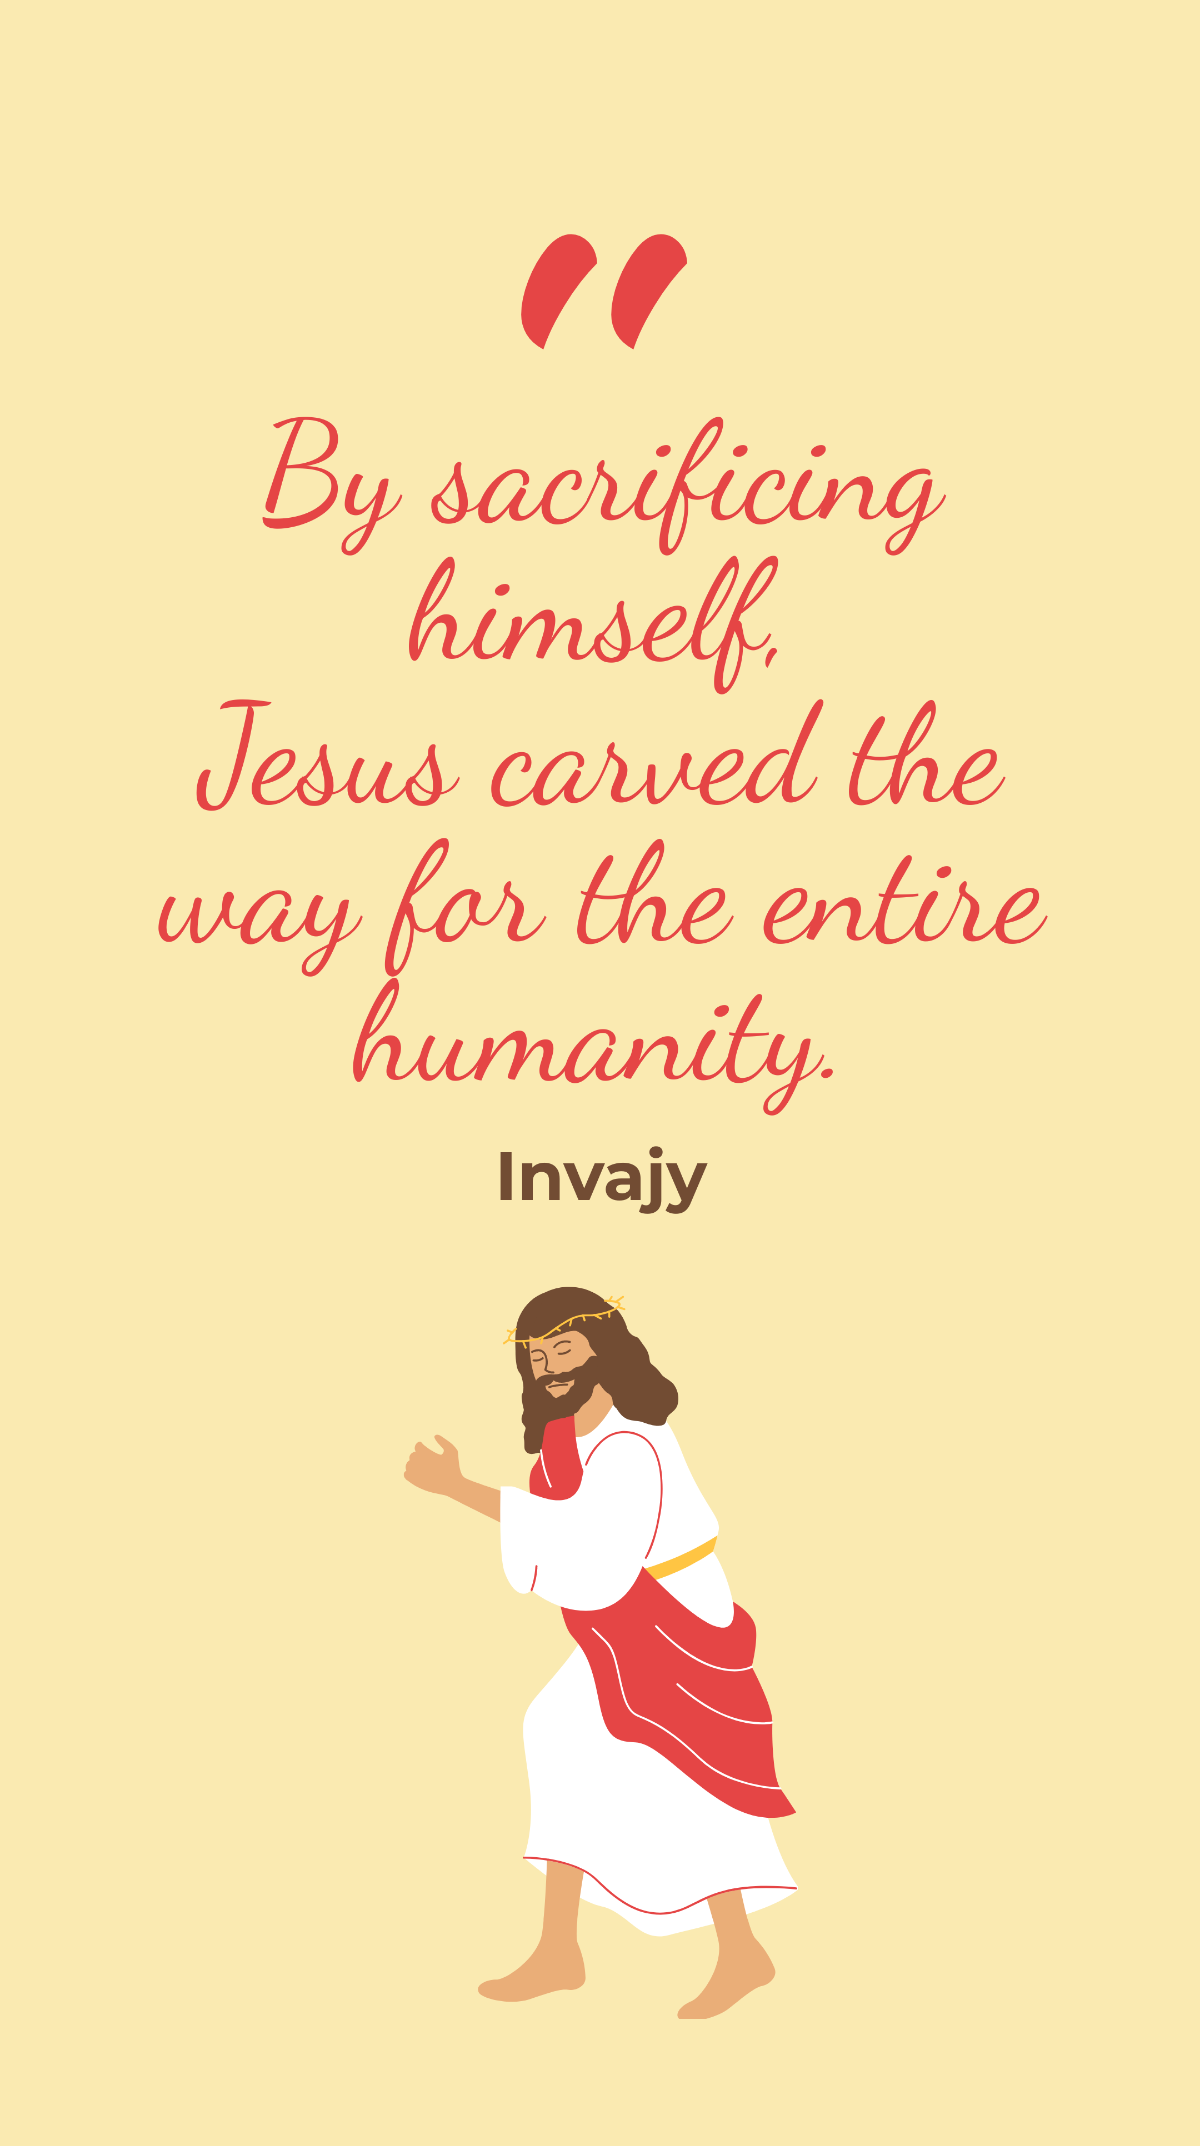 Invajy - By sacrificing himself, Jesus carved the way for the entire humanity. Template